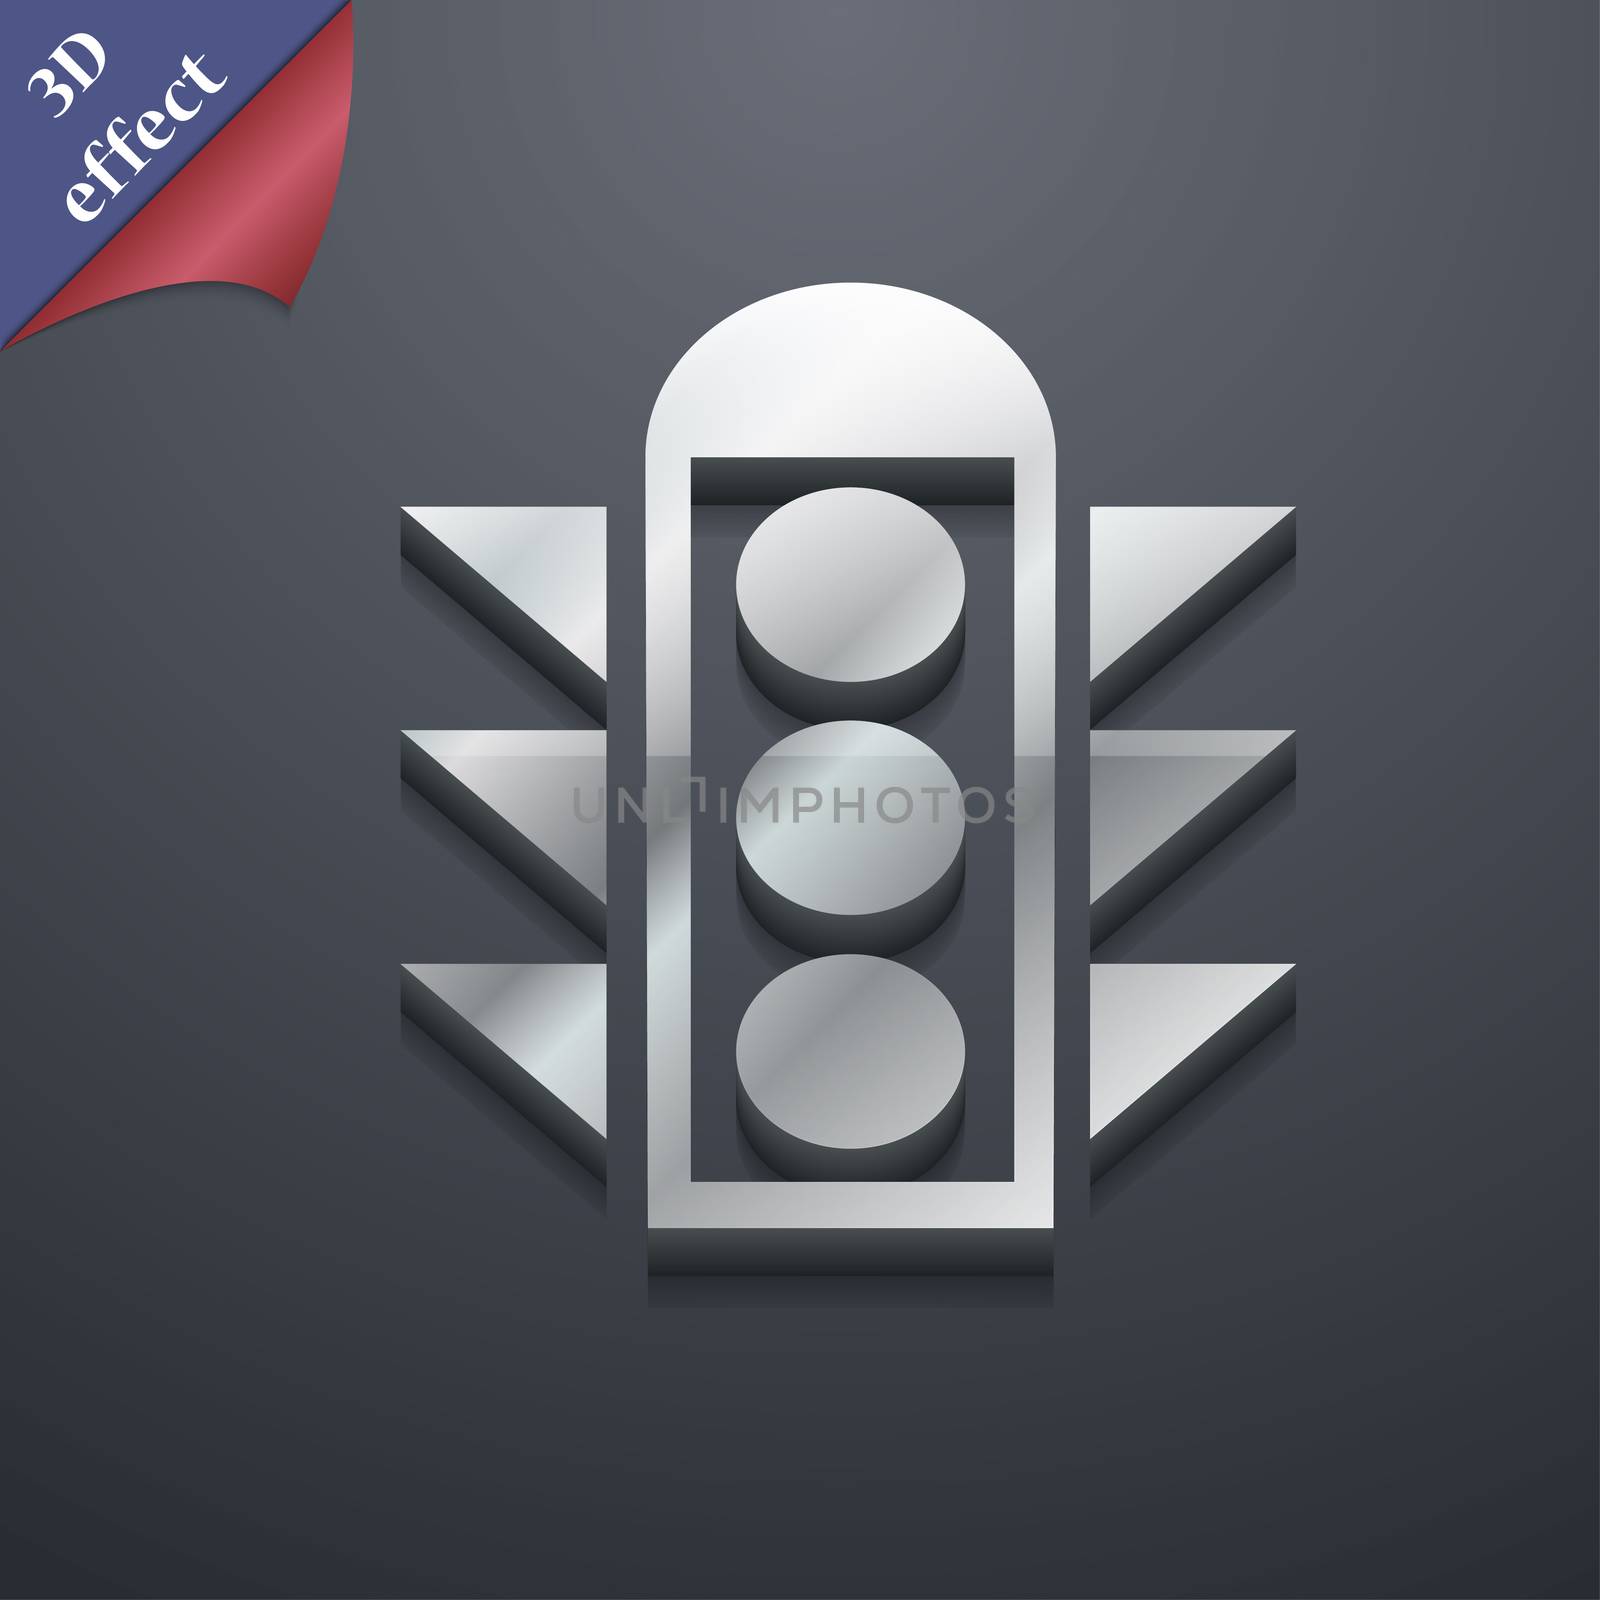 Traffic light signal icon symbol. 3D style. Trendy, modern design with space for your text illustration. Rastrized copy